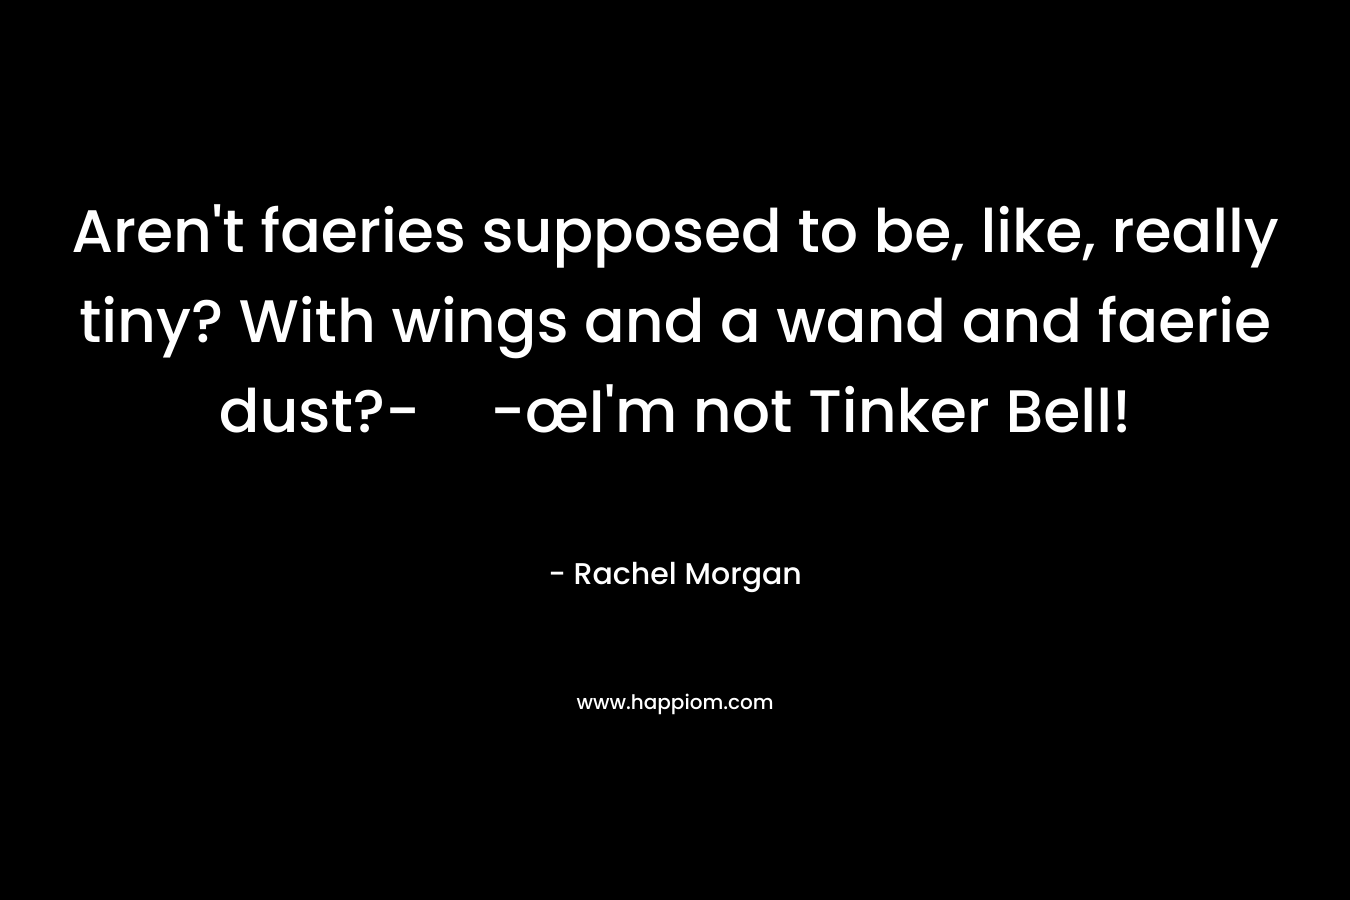 Aren't faeries supposed to be, like, really tiny? With wings and a wand and faerie dust?--œI'm not Tinker Bell!